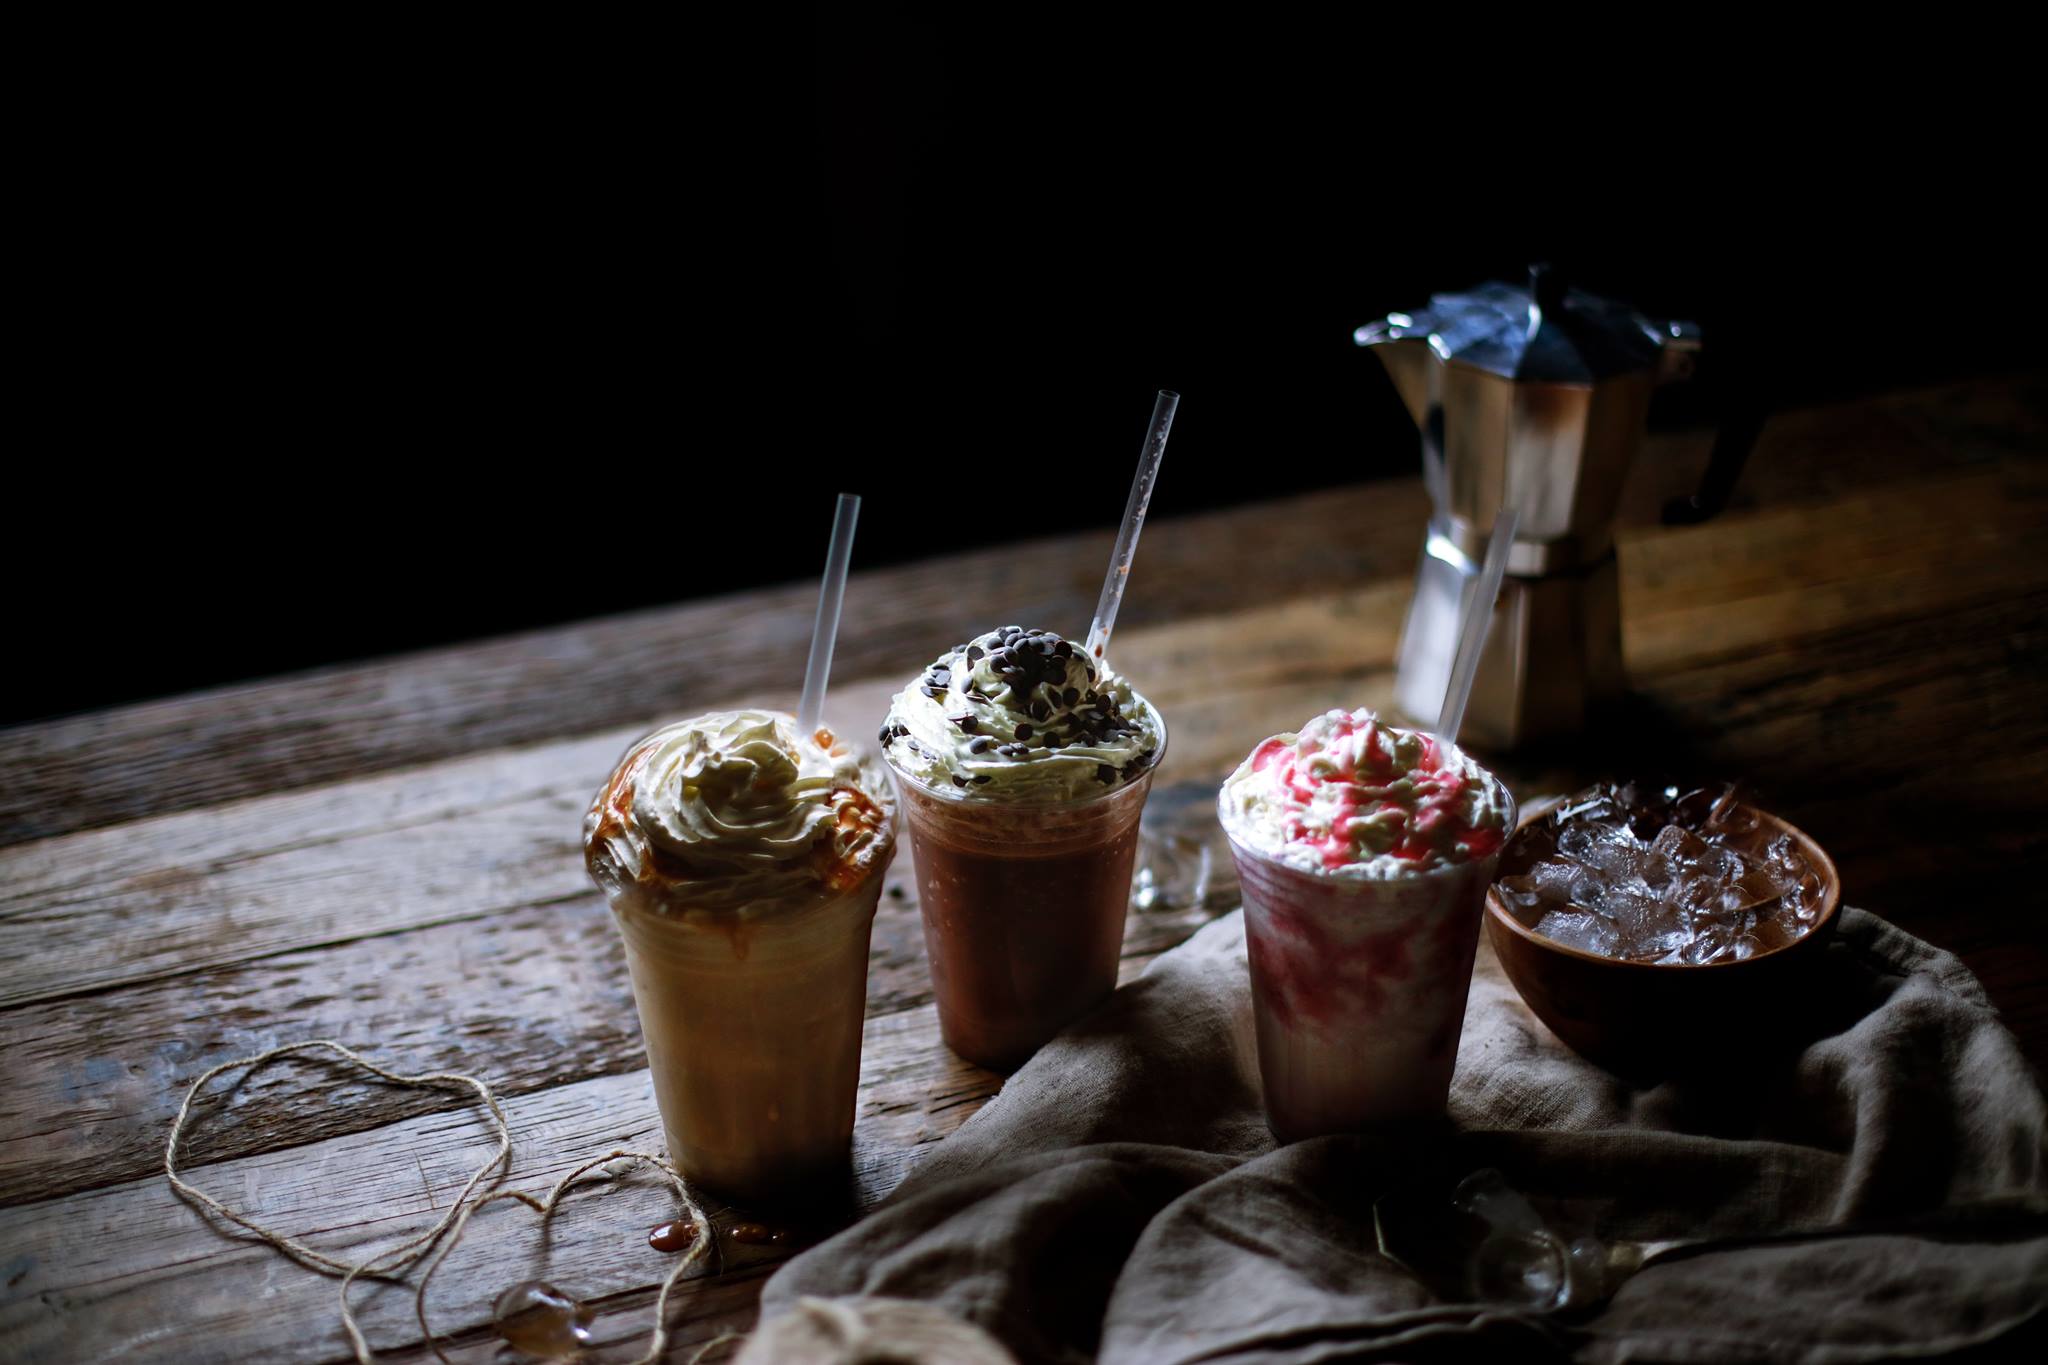 Frappe cremes at Caffe Nero